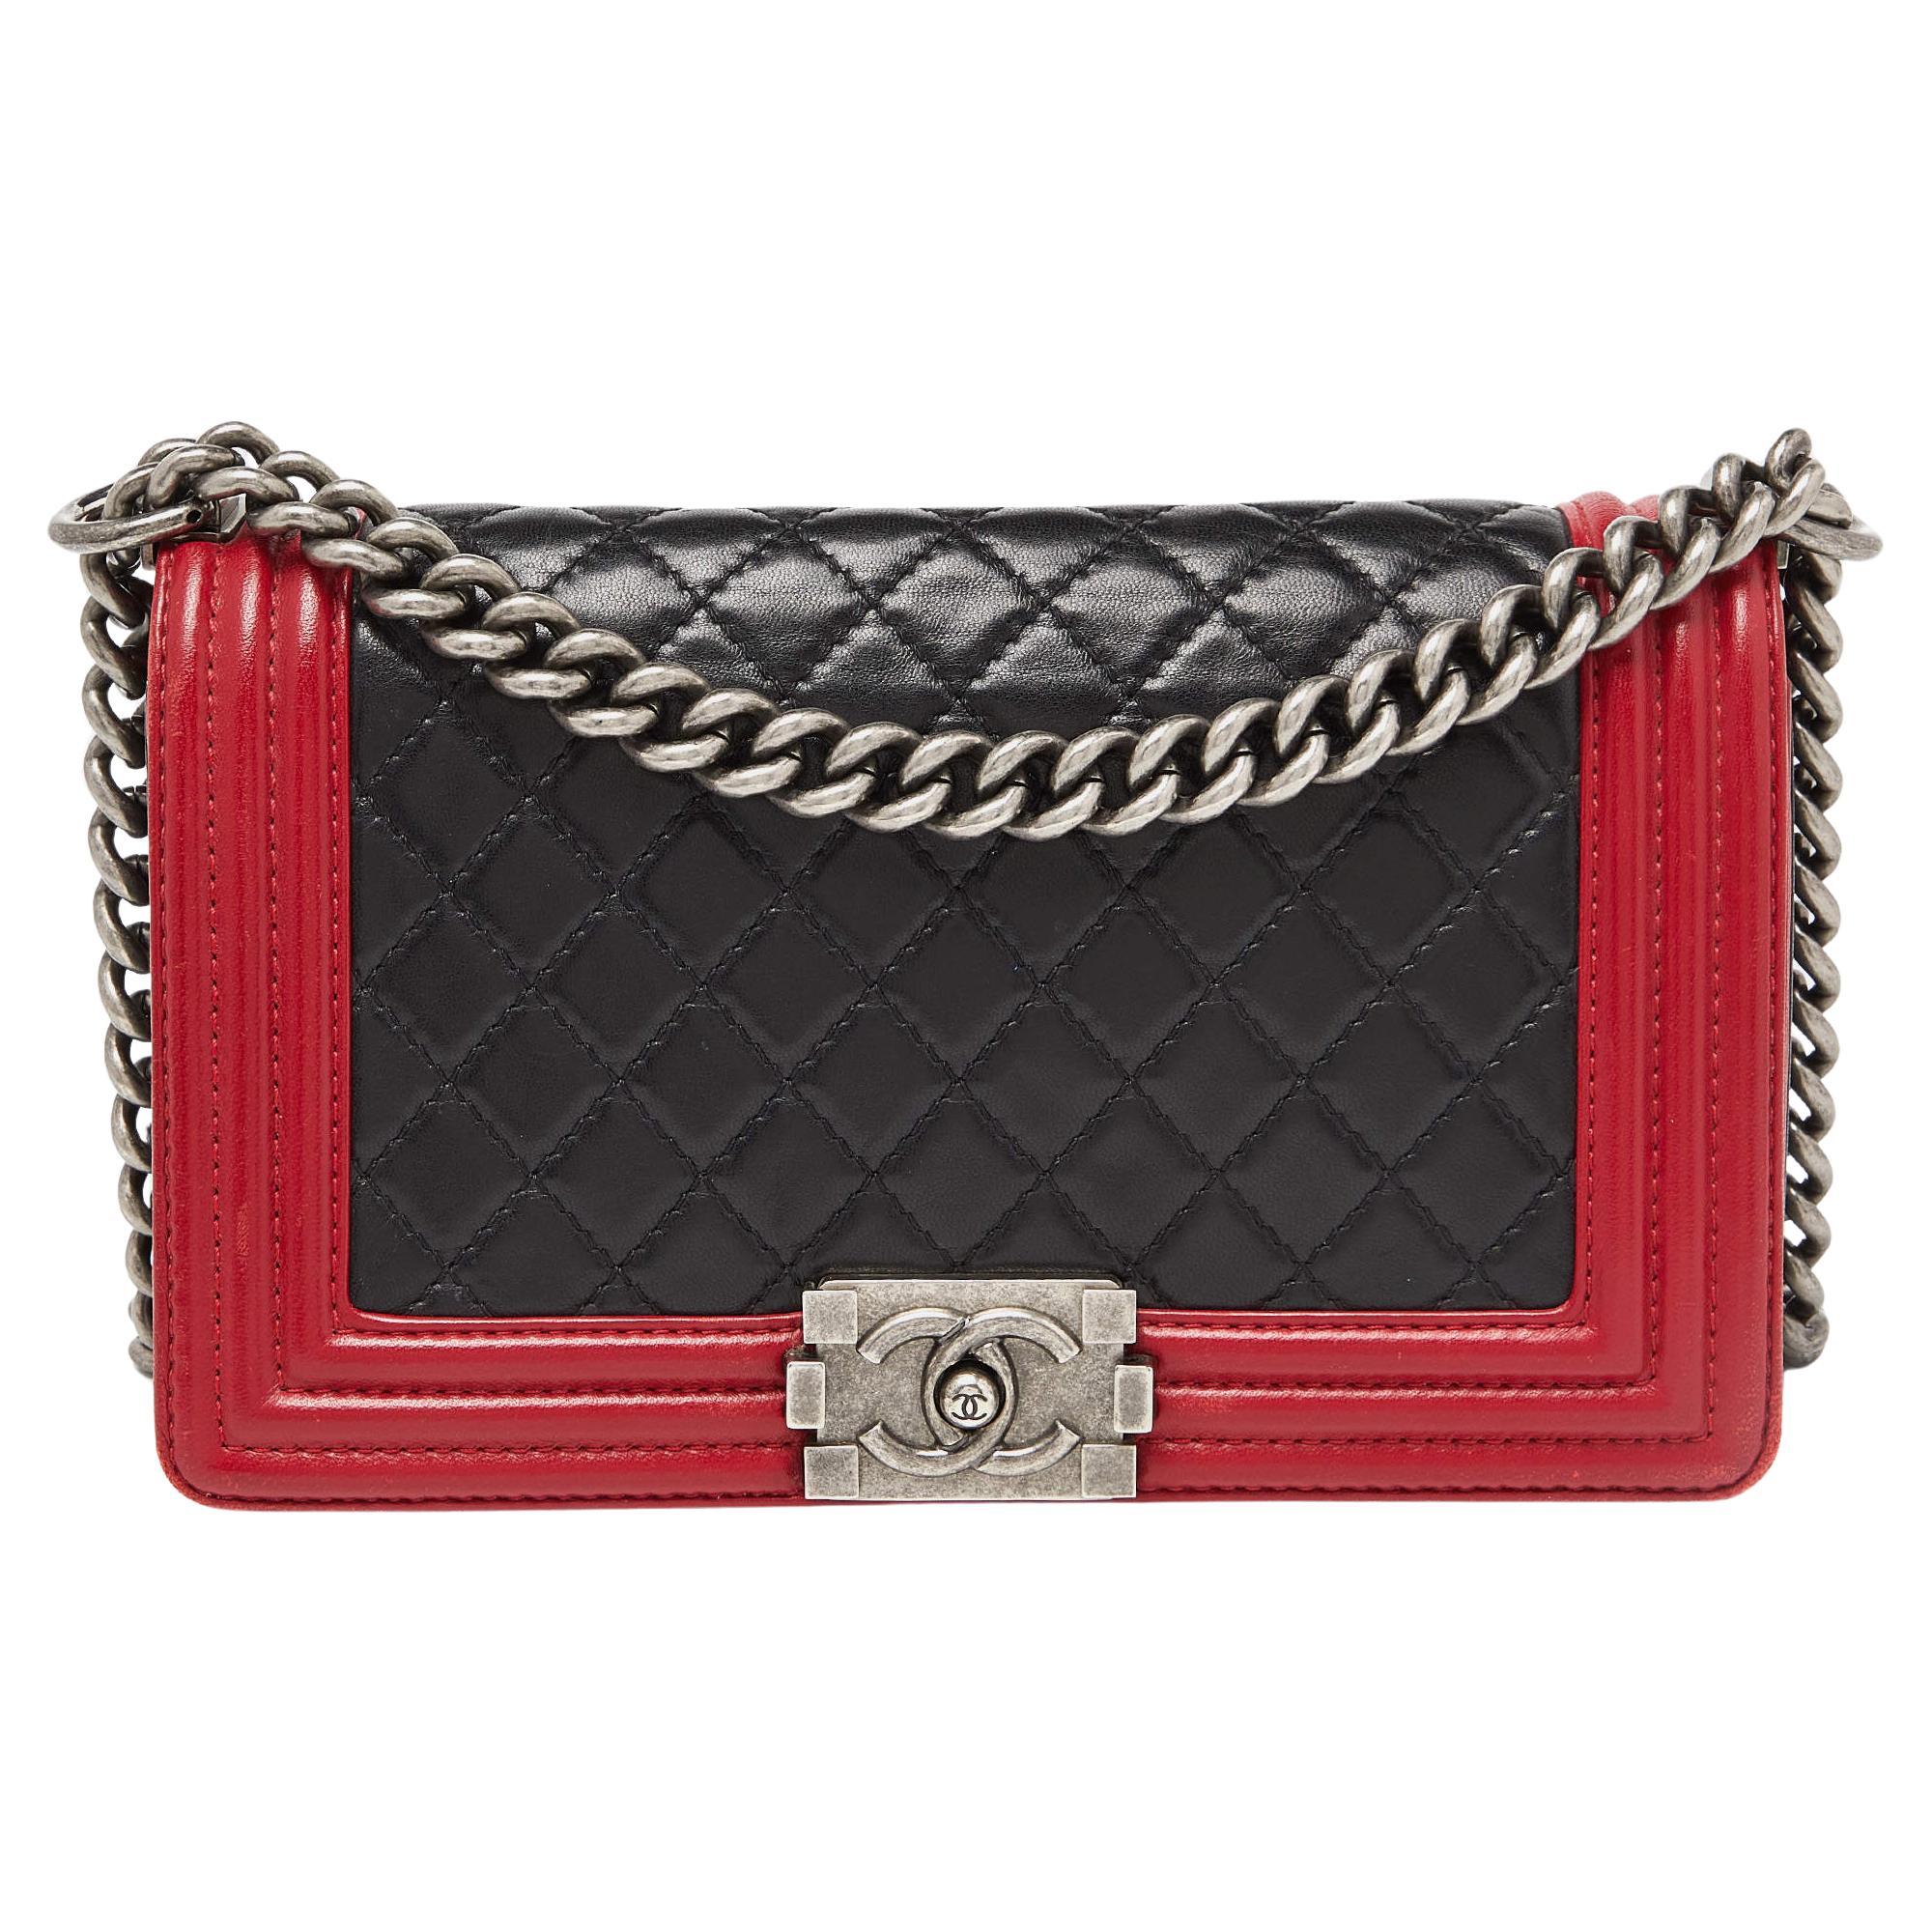 Chanel Black/Red Quilted Leather Medium Boy Flap Bag For Sale